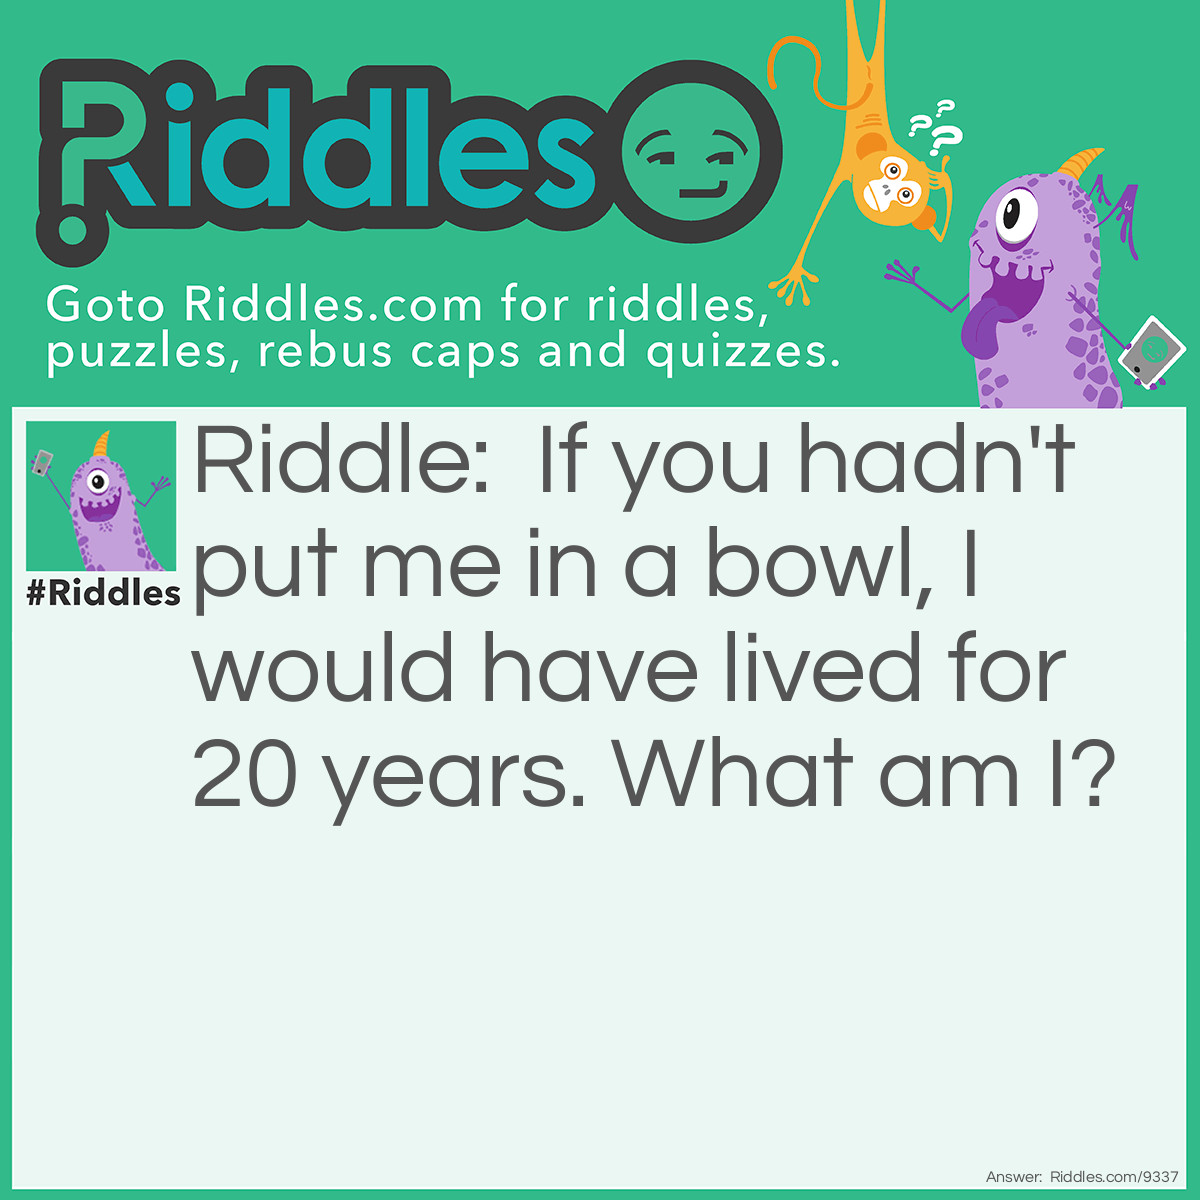 Riddle: If you hadn't put me in a bowl, I would have lived for 20 years. What am I? Answer: I'm your goldfish, you monster.